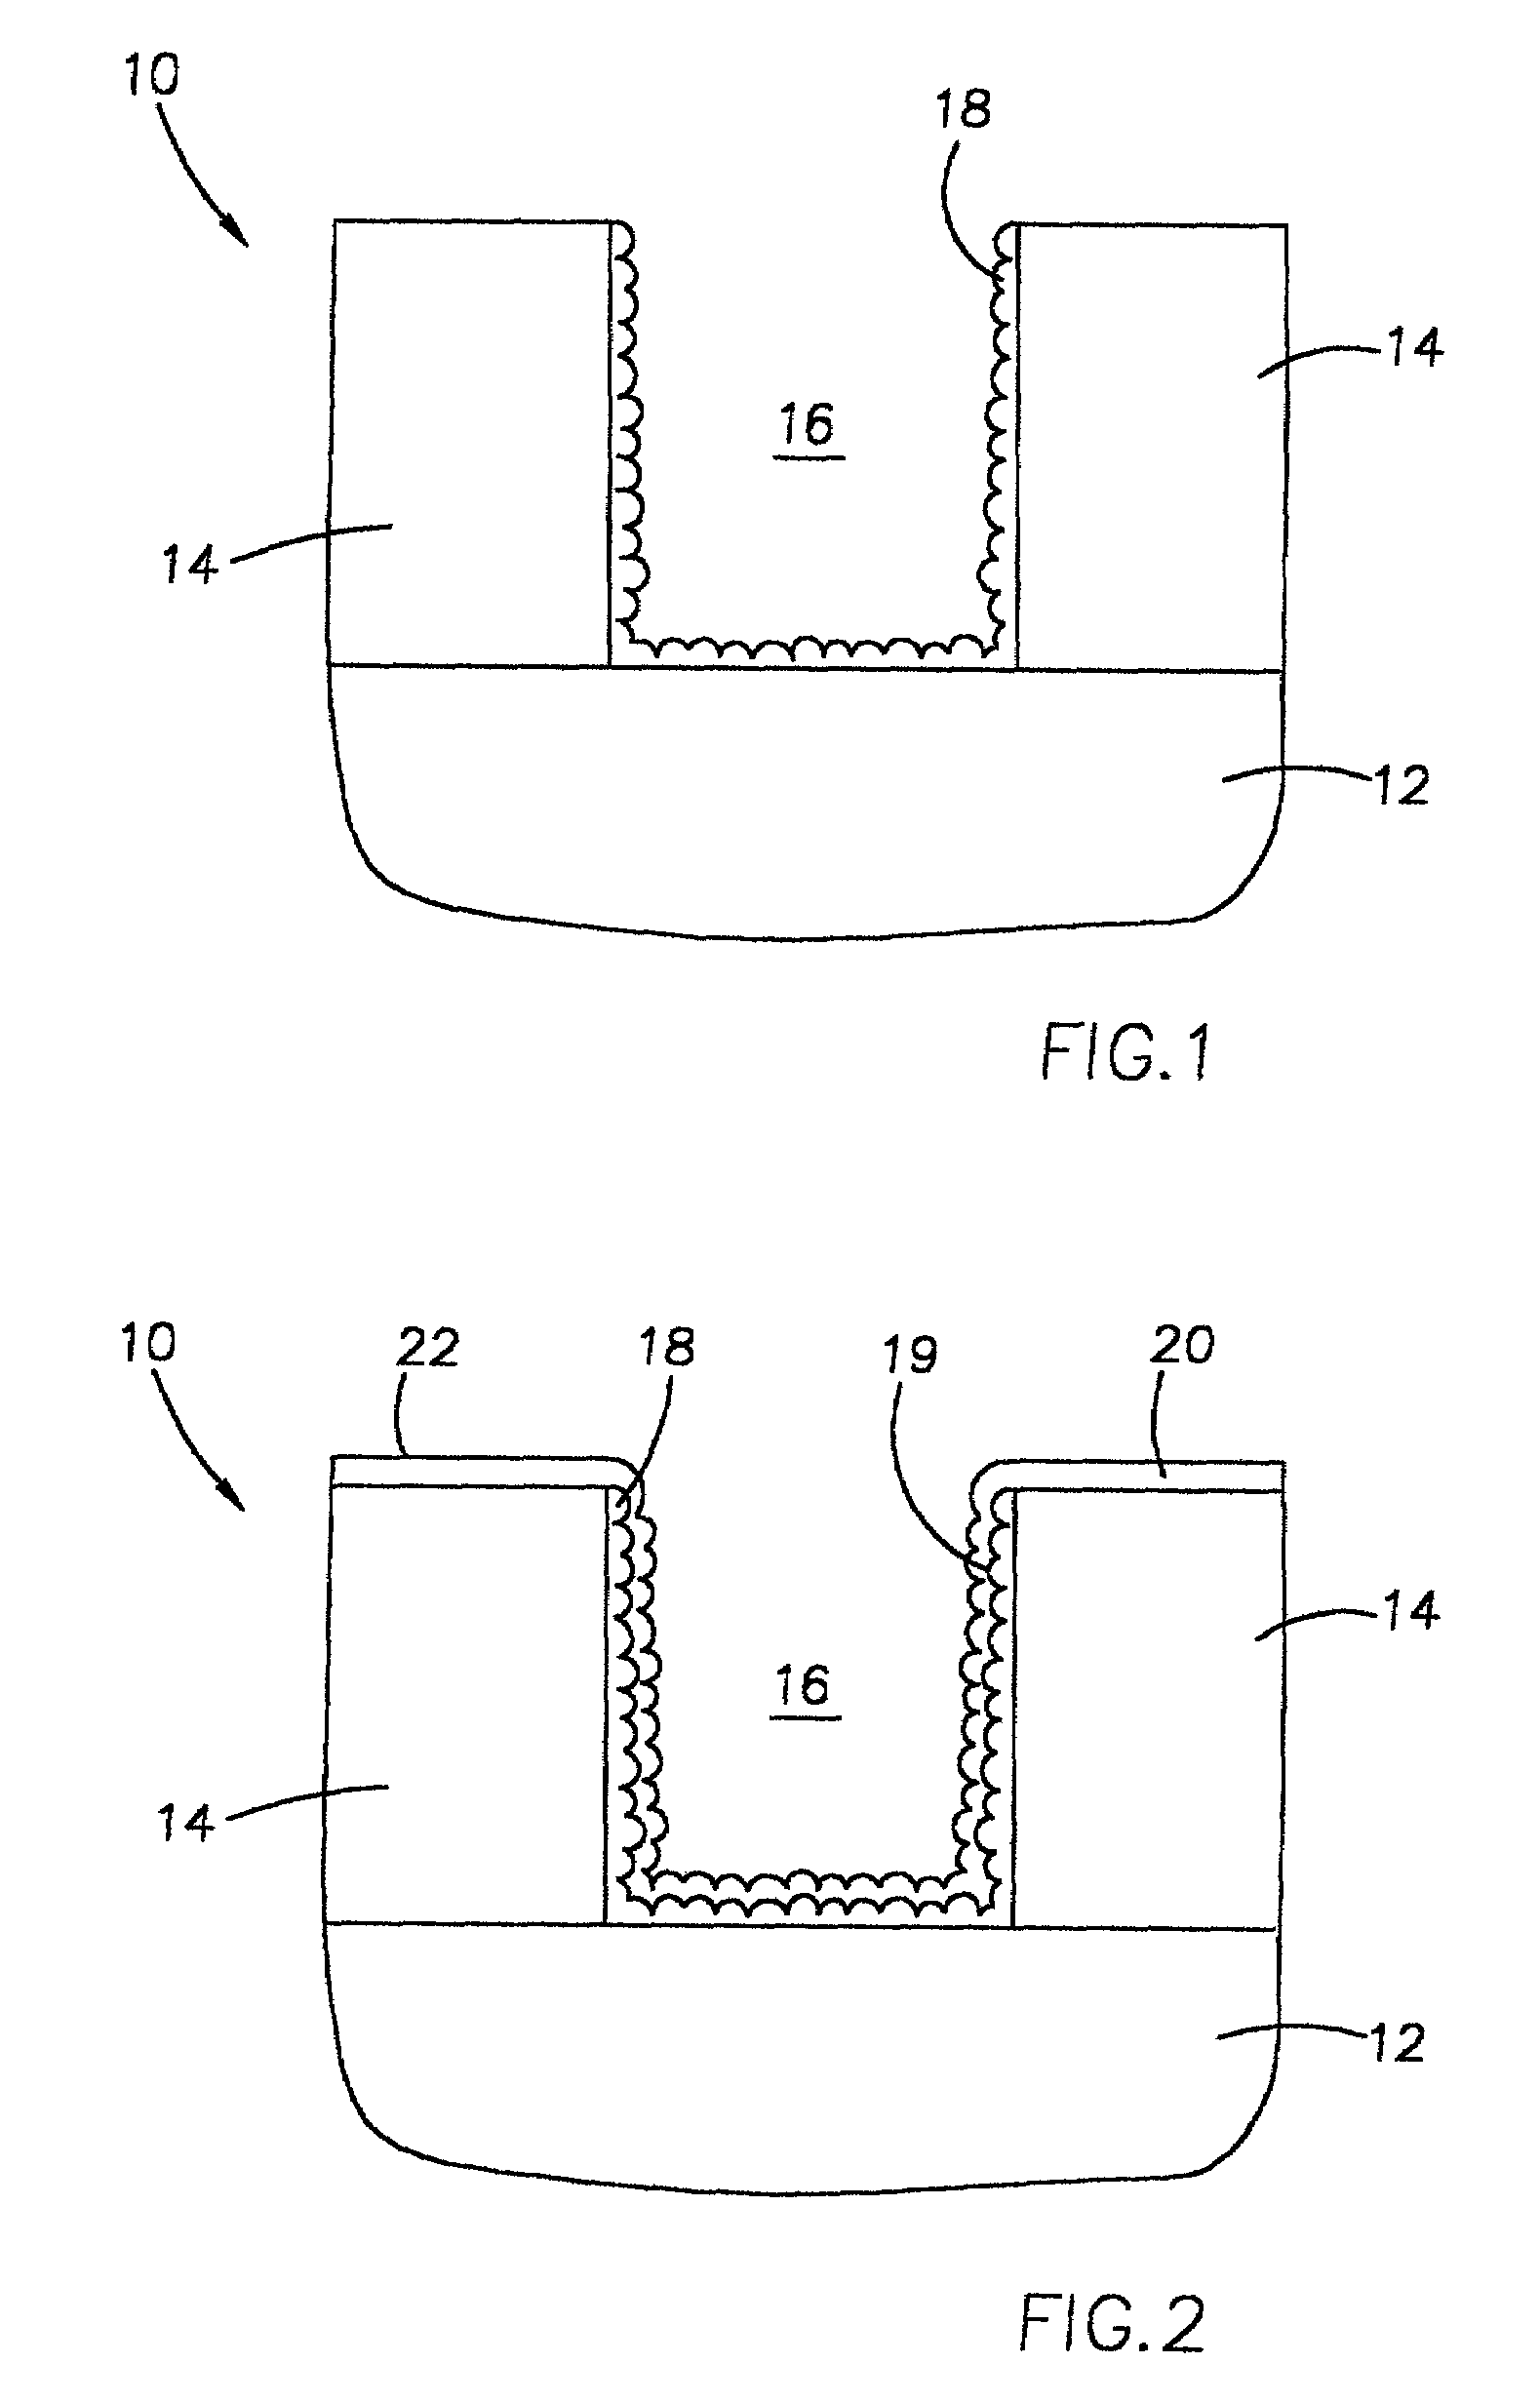 Method of improved high K dielectric-polysilicon interface for CMOS devices